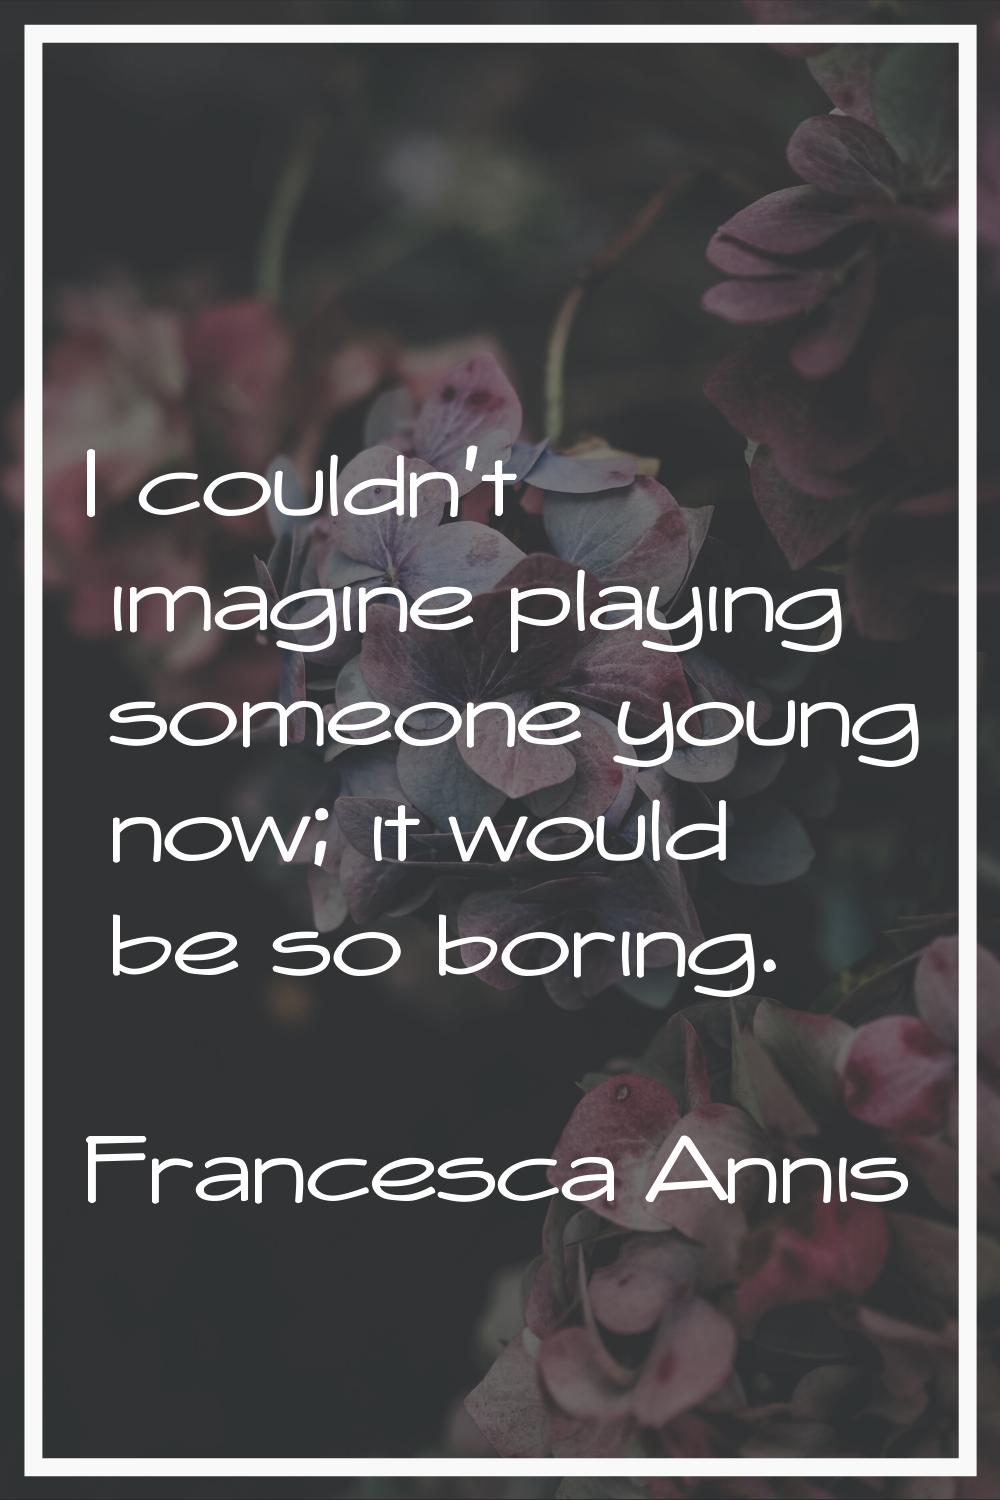 I couldn't imagine playing someone young now; it would be so boring.